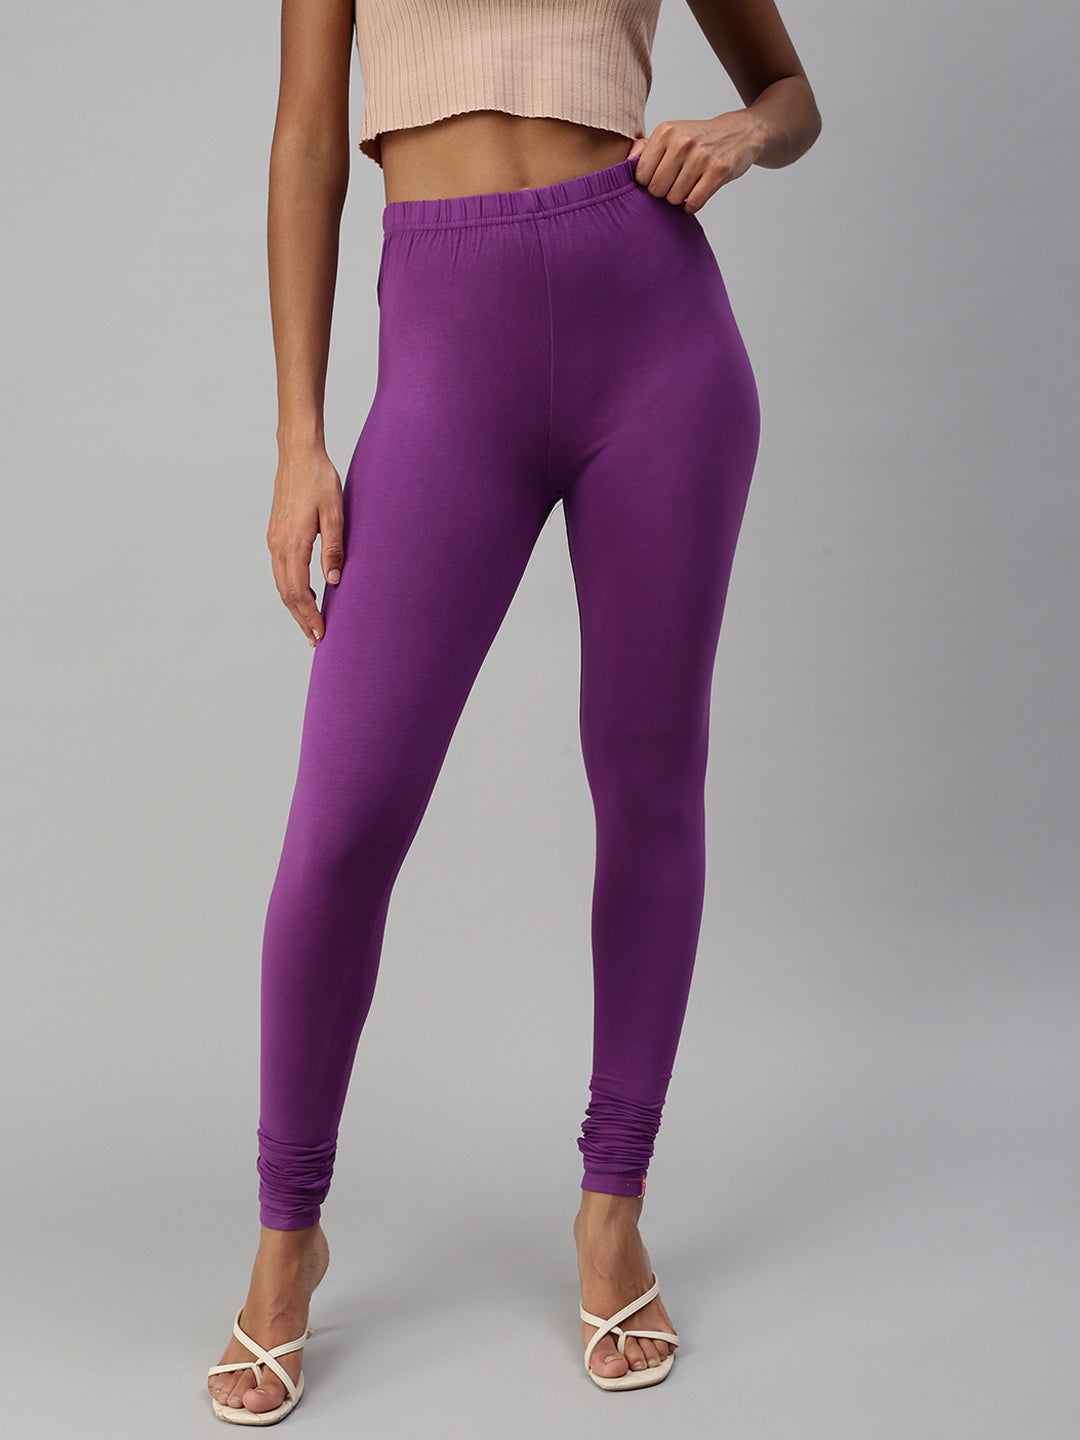 Stylish Violet Churidar Leggings by Prisma - Perfect Fit for Any